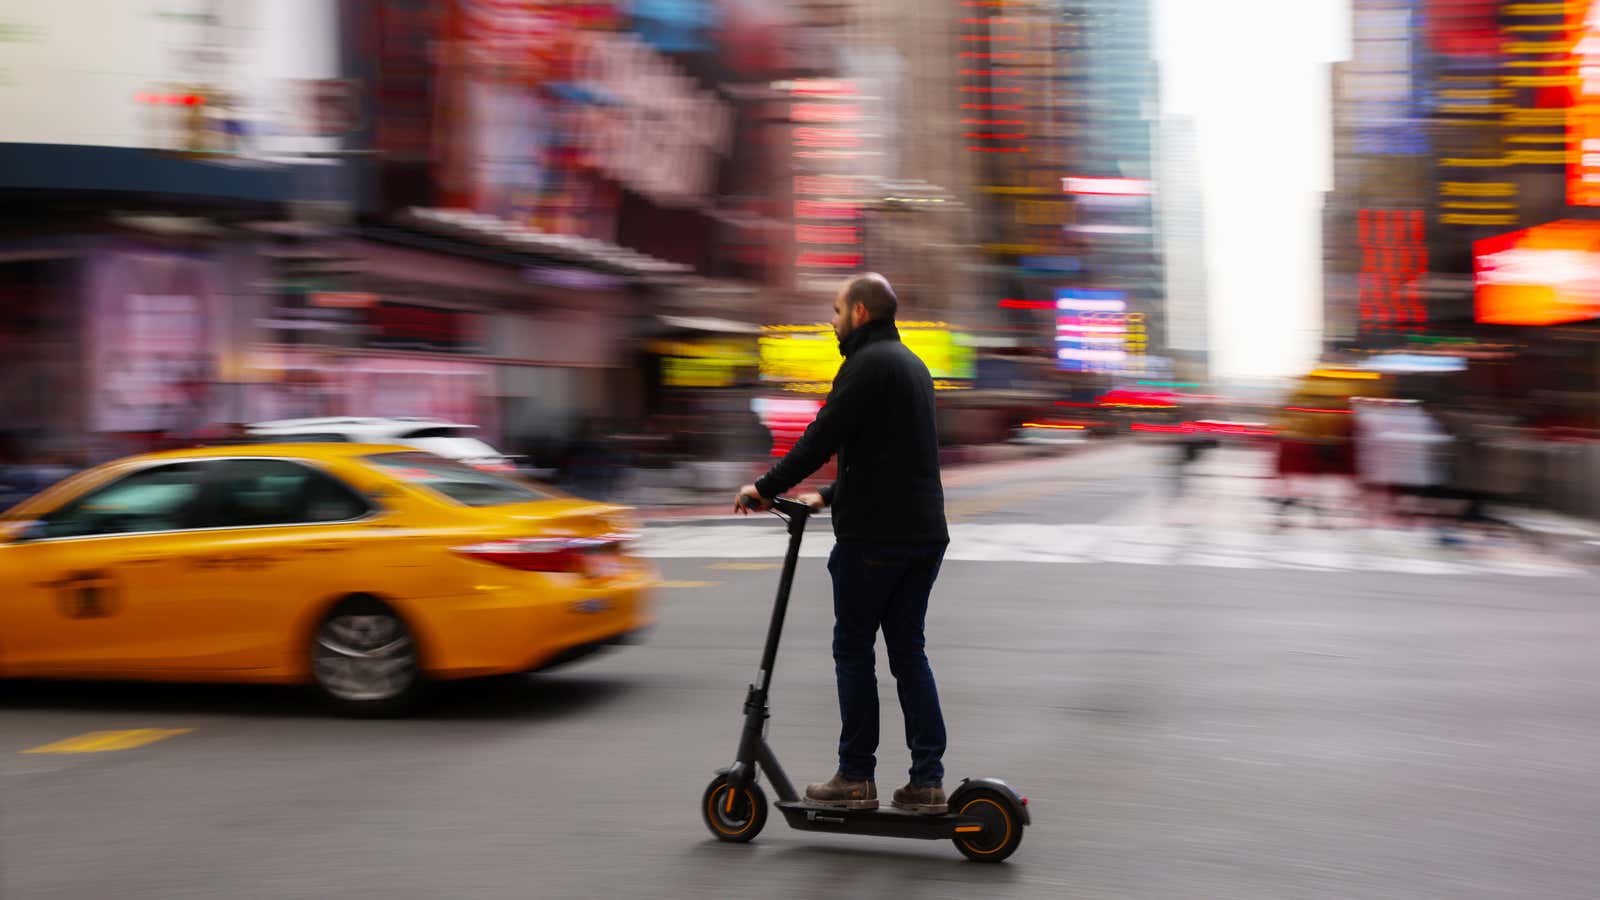 Micromobility company Spin says it will only operate in cities that limit competition.